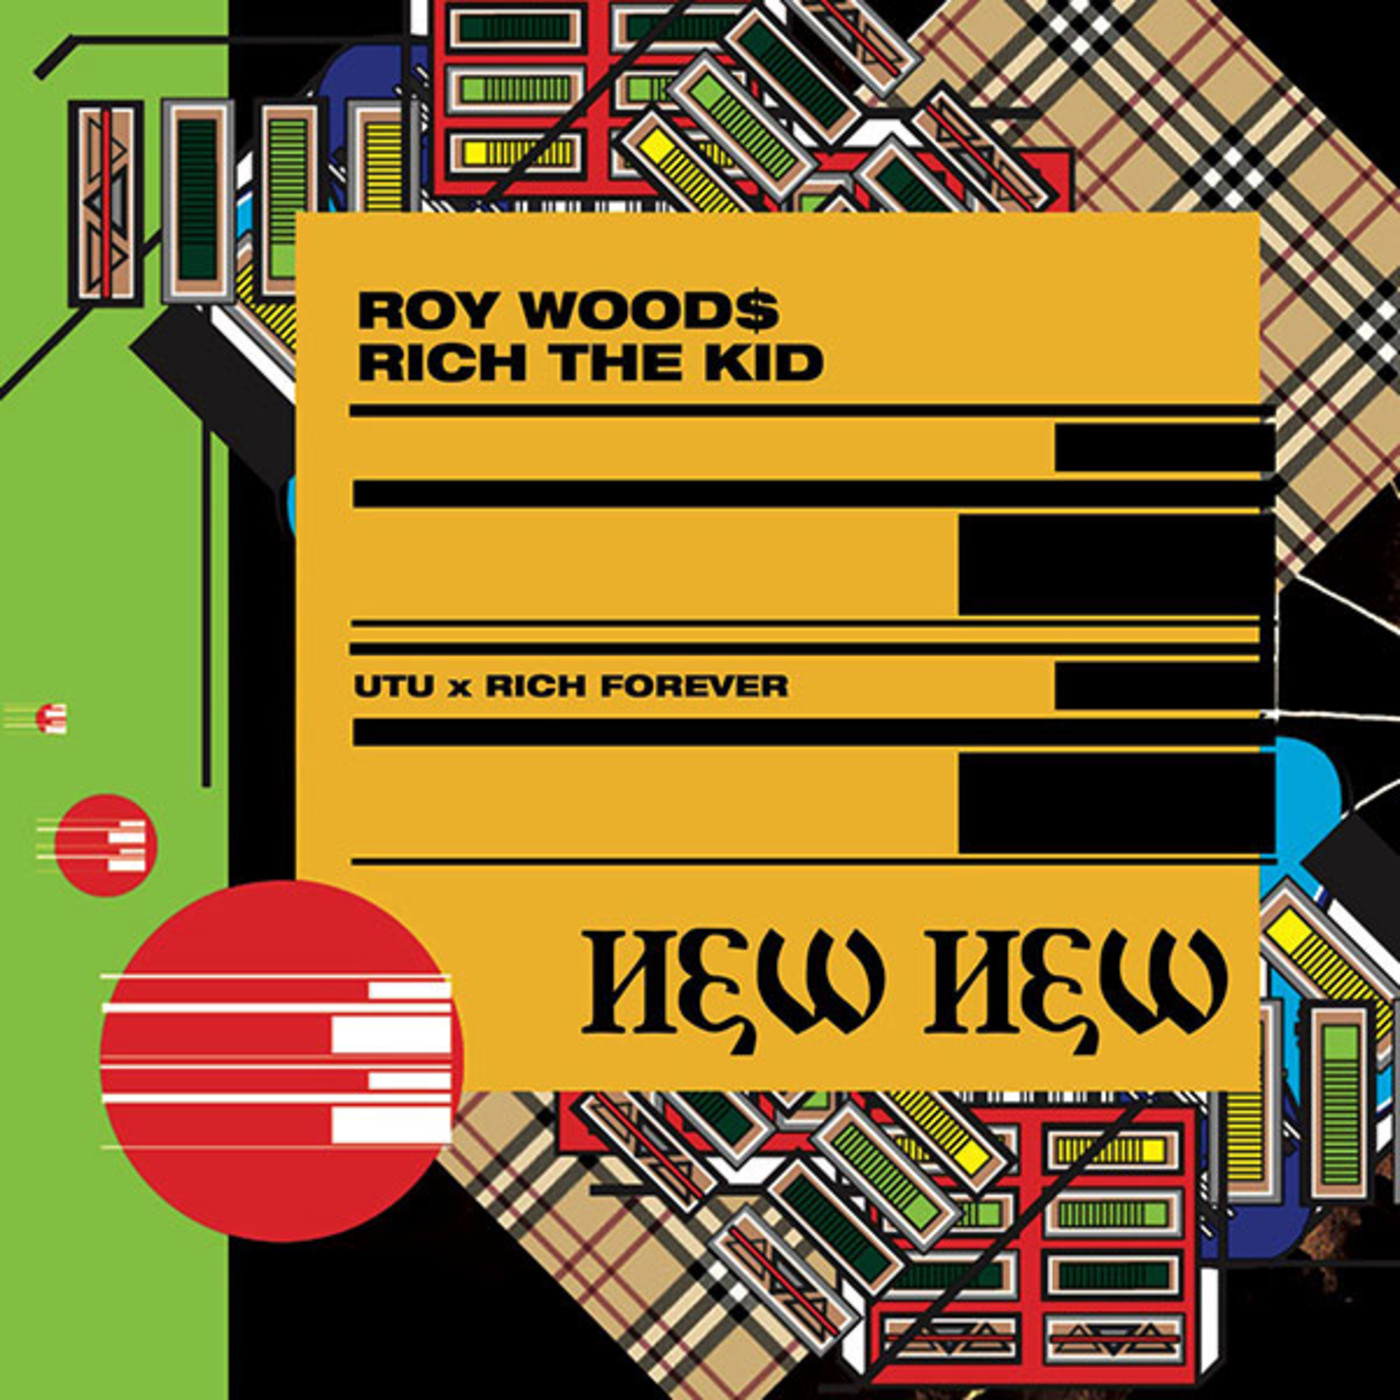 Roy Woods Just Debuted Two New Songs on OVO Sound Radio Complex